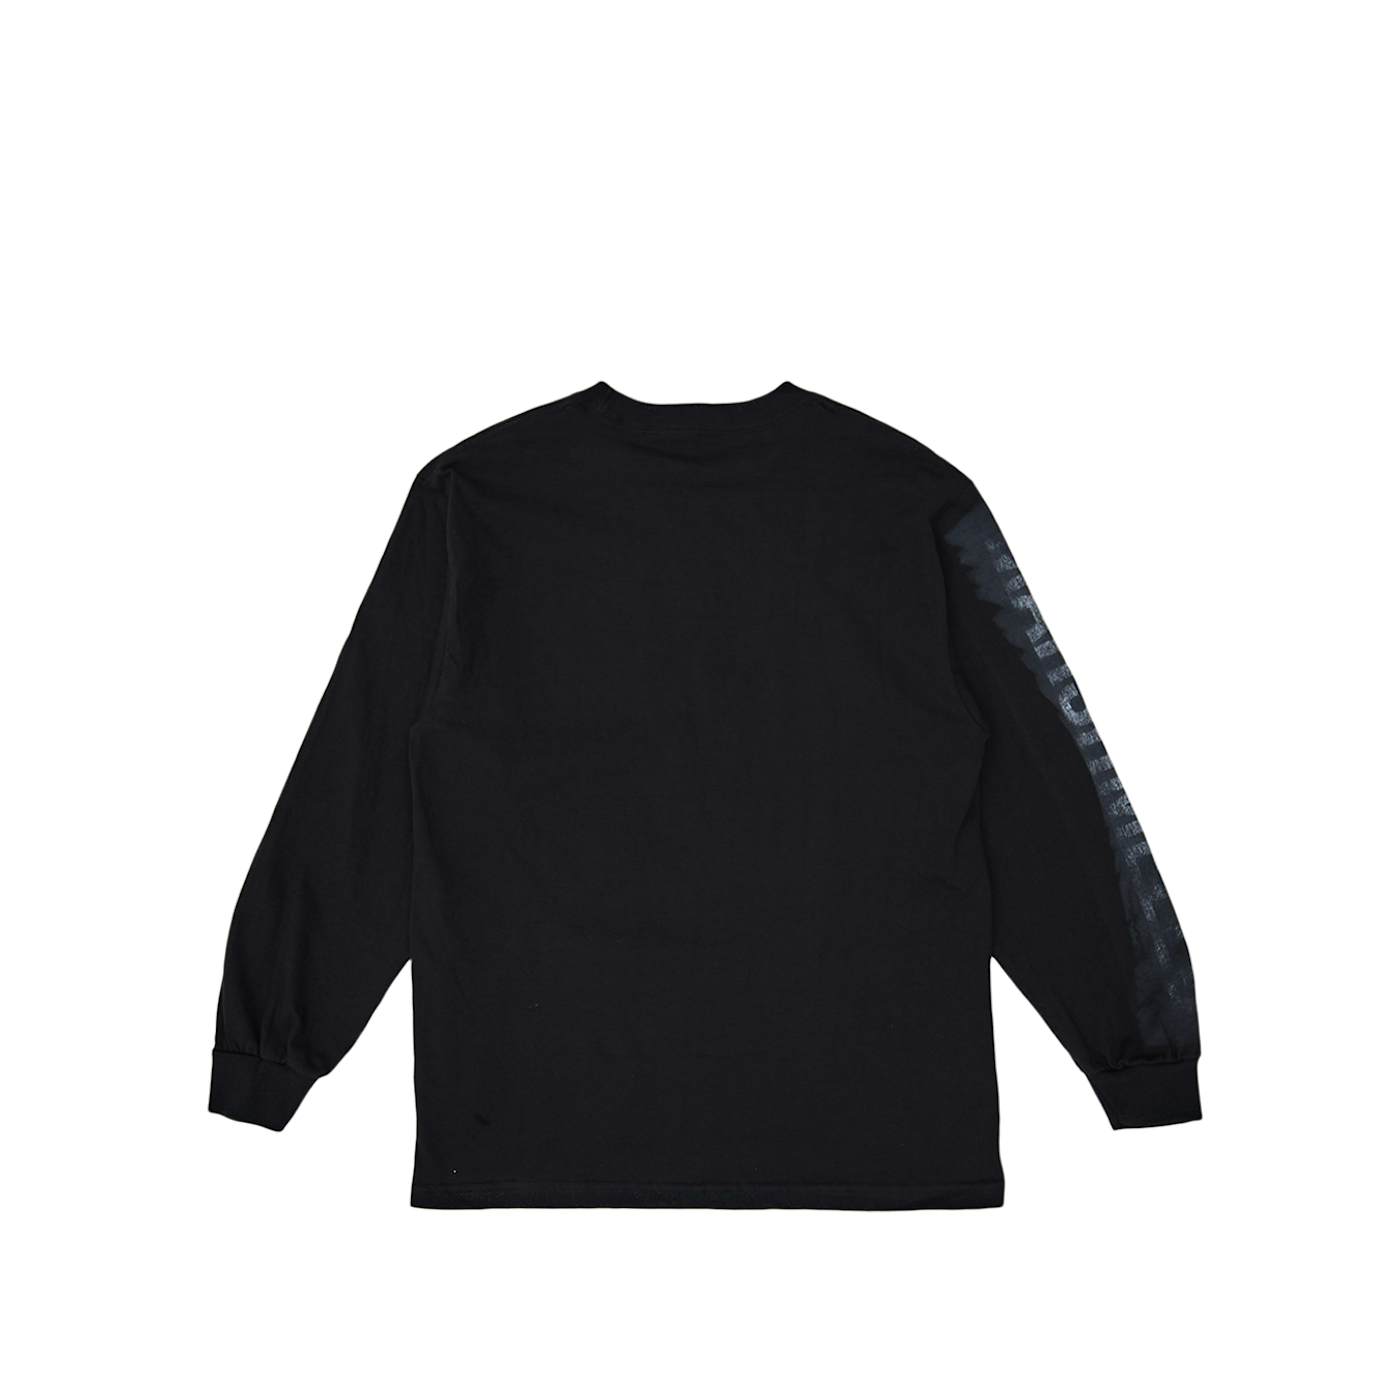 Marshmello Out of Focus L/S Shirt